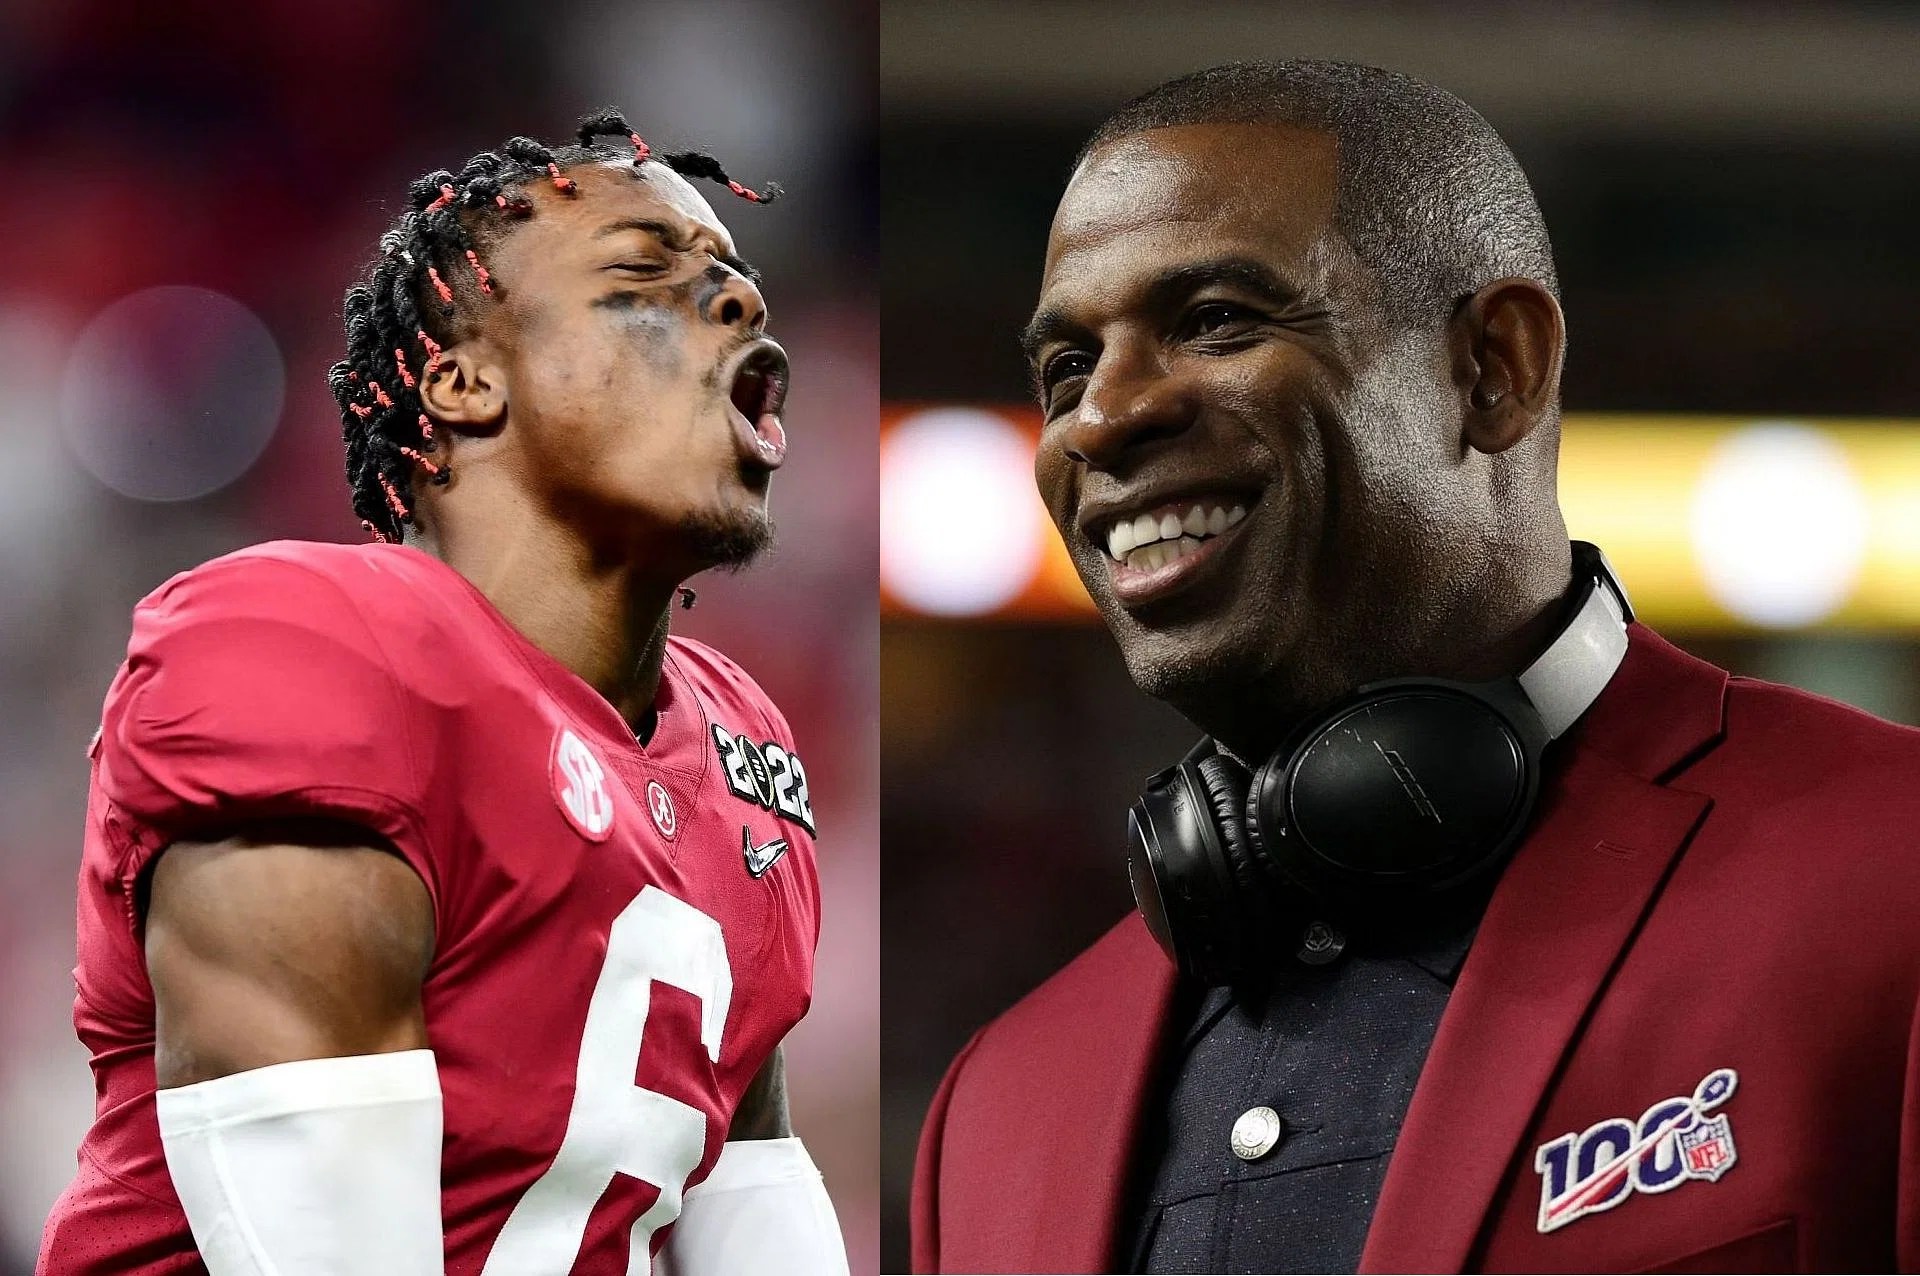 Are Deion Sanders and Trey Sanders related? Alabama's 5star recruit